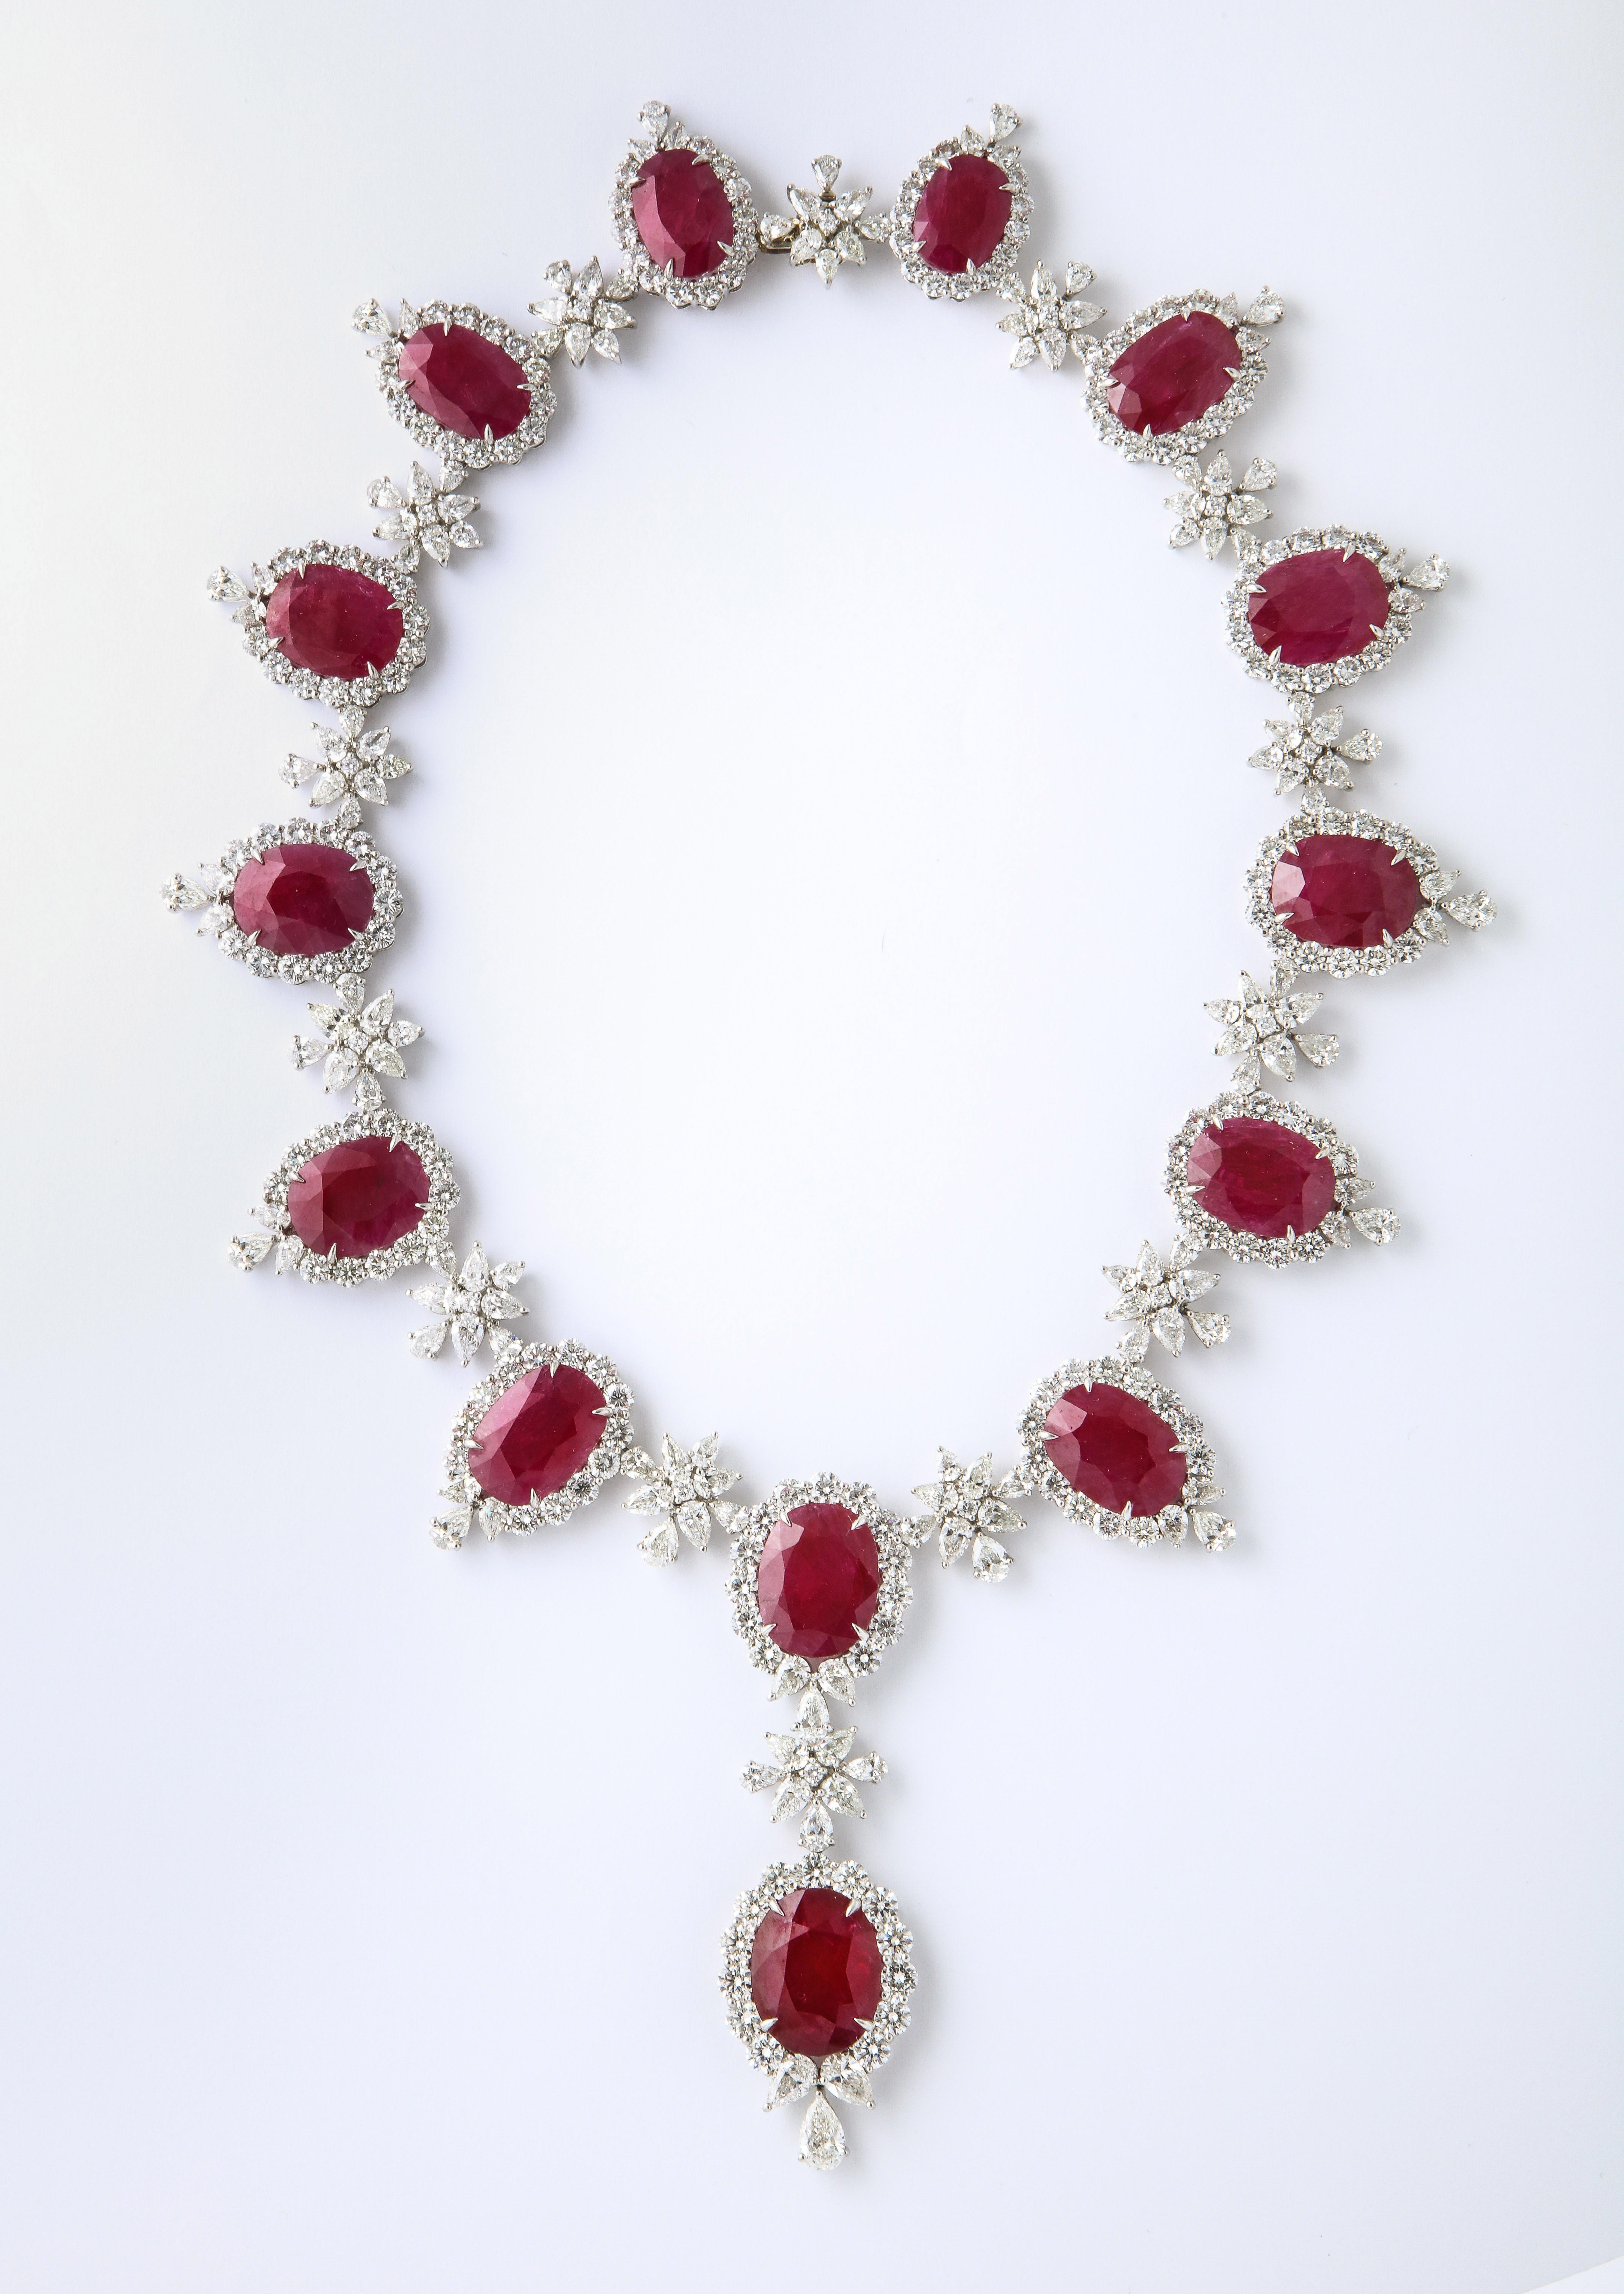 
An Important Ruby and Diamond Necklace 

209.10 carats of certified “Intense Red” Ruby

92.43 carats of colorless round, pear and marquise cut diamonds 

Set in Platinum 

17.5 inch length, the center piece measures approximately 3.25 inches